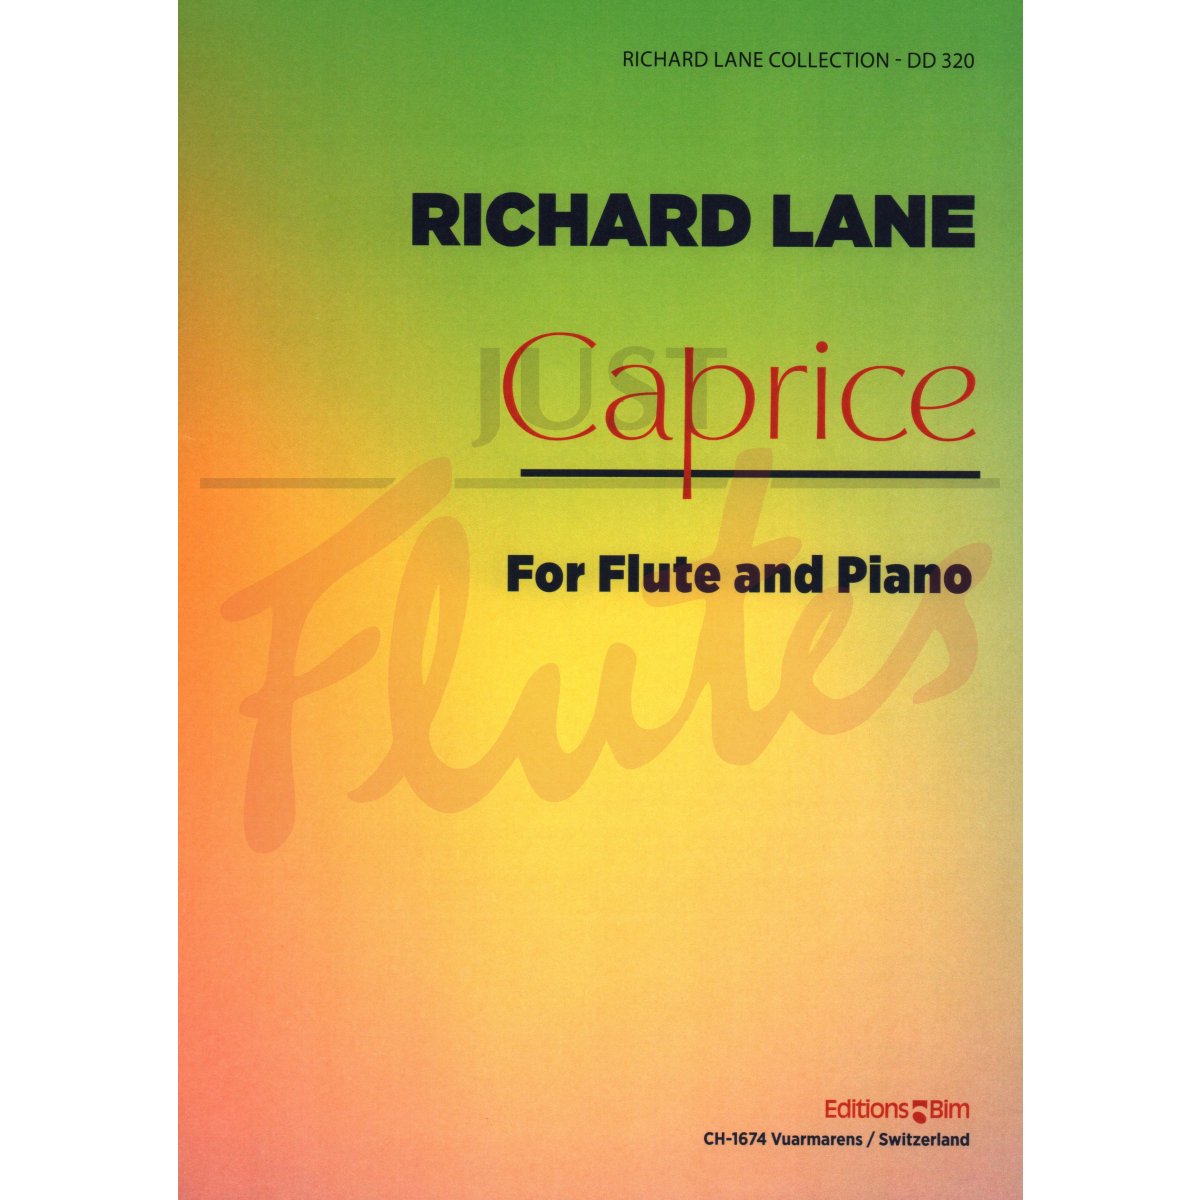 Caprice for Flute and Piano